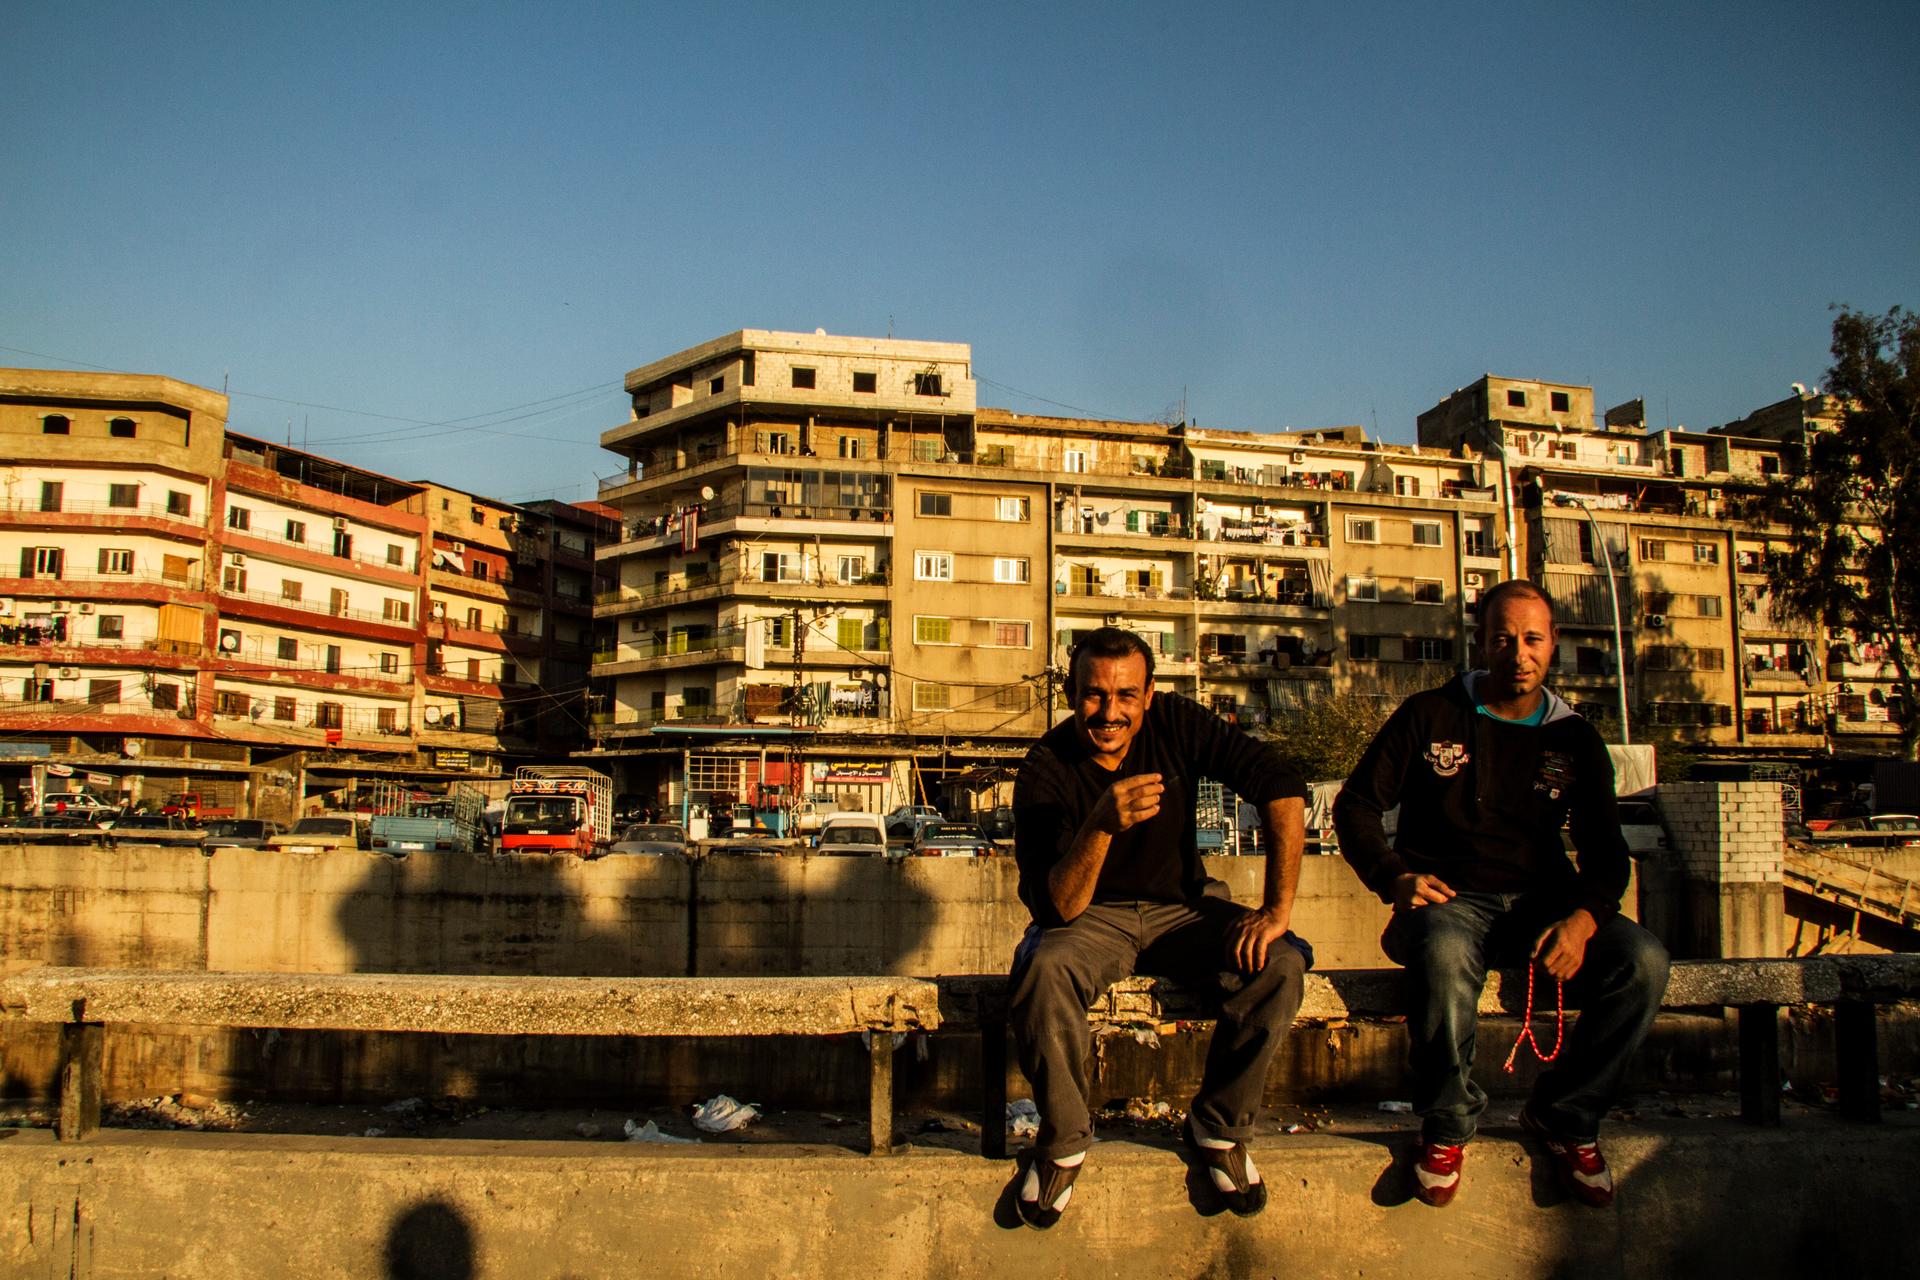 Bab al-Tabbaneh residents Usama and Hussein sit on a railing at the edge of the neighborhood. They say for men like them with families to support there isn't enough work in Tripoli and while they're against extremist groups like the Islamic State, they ca